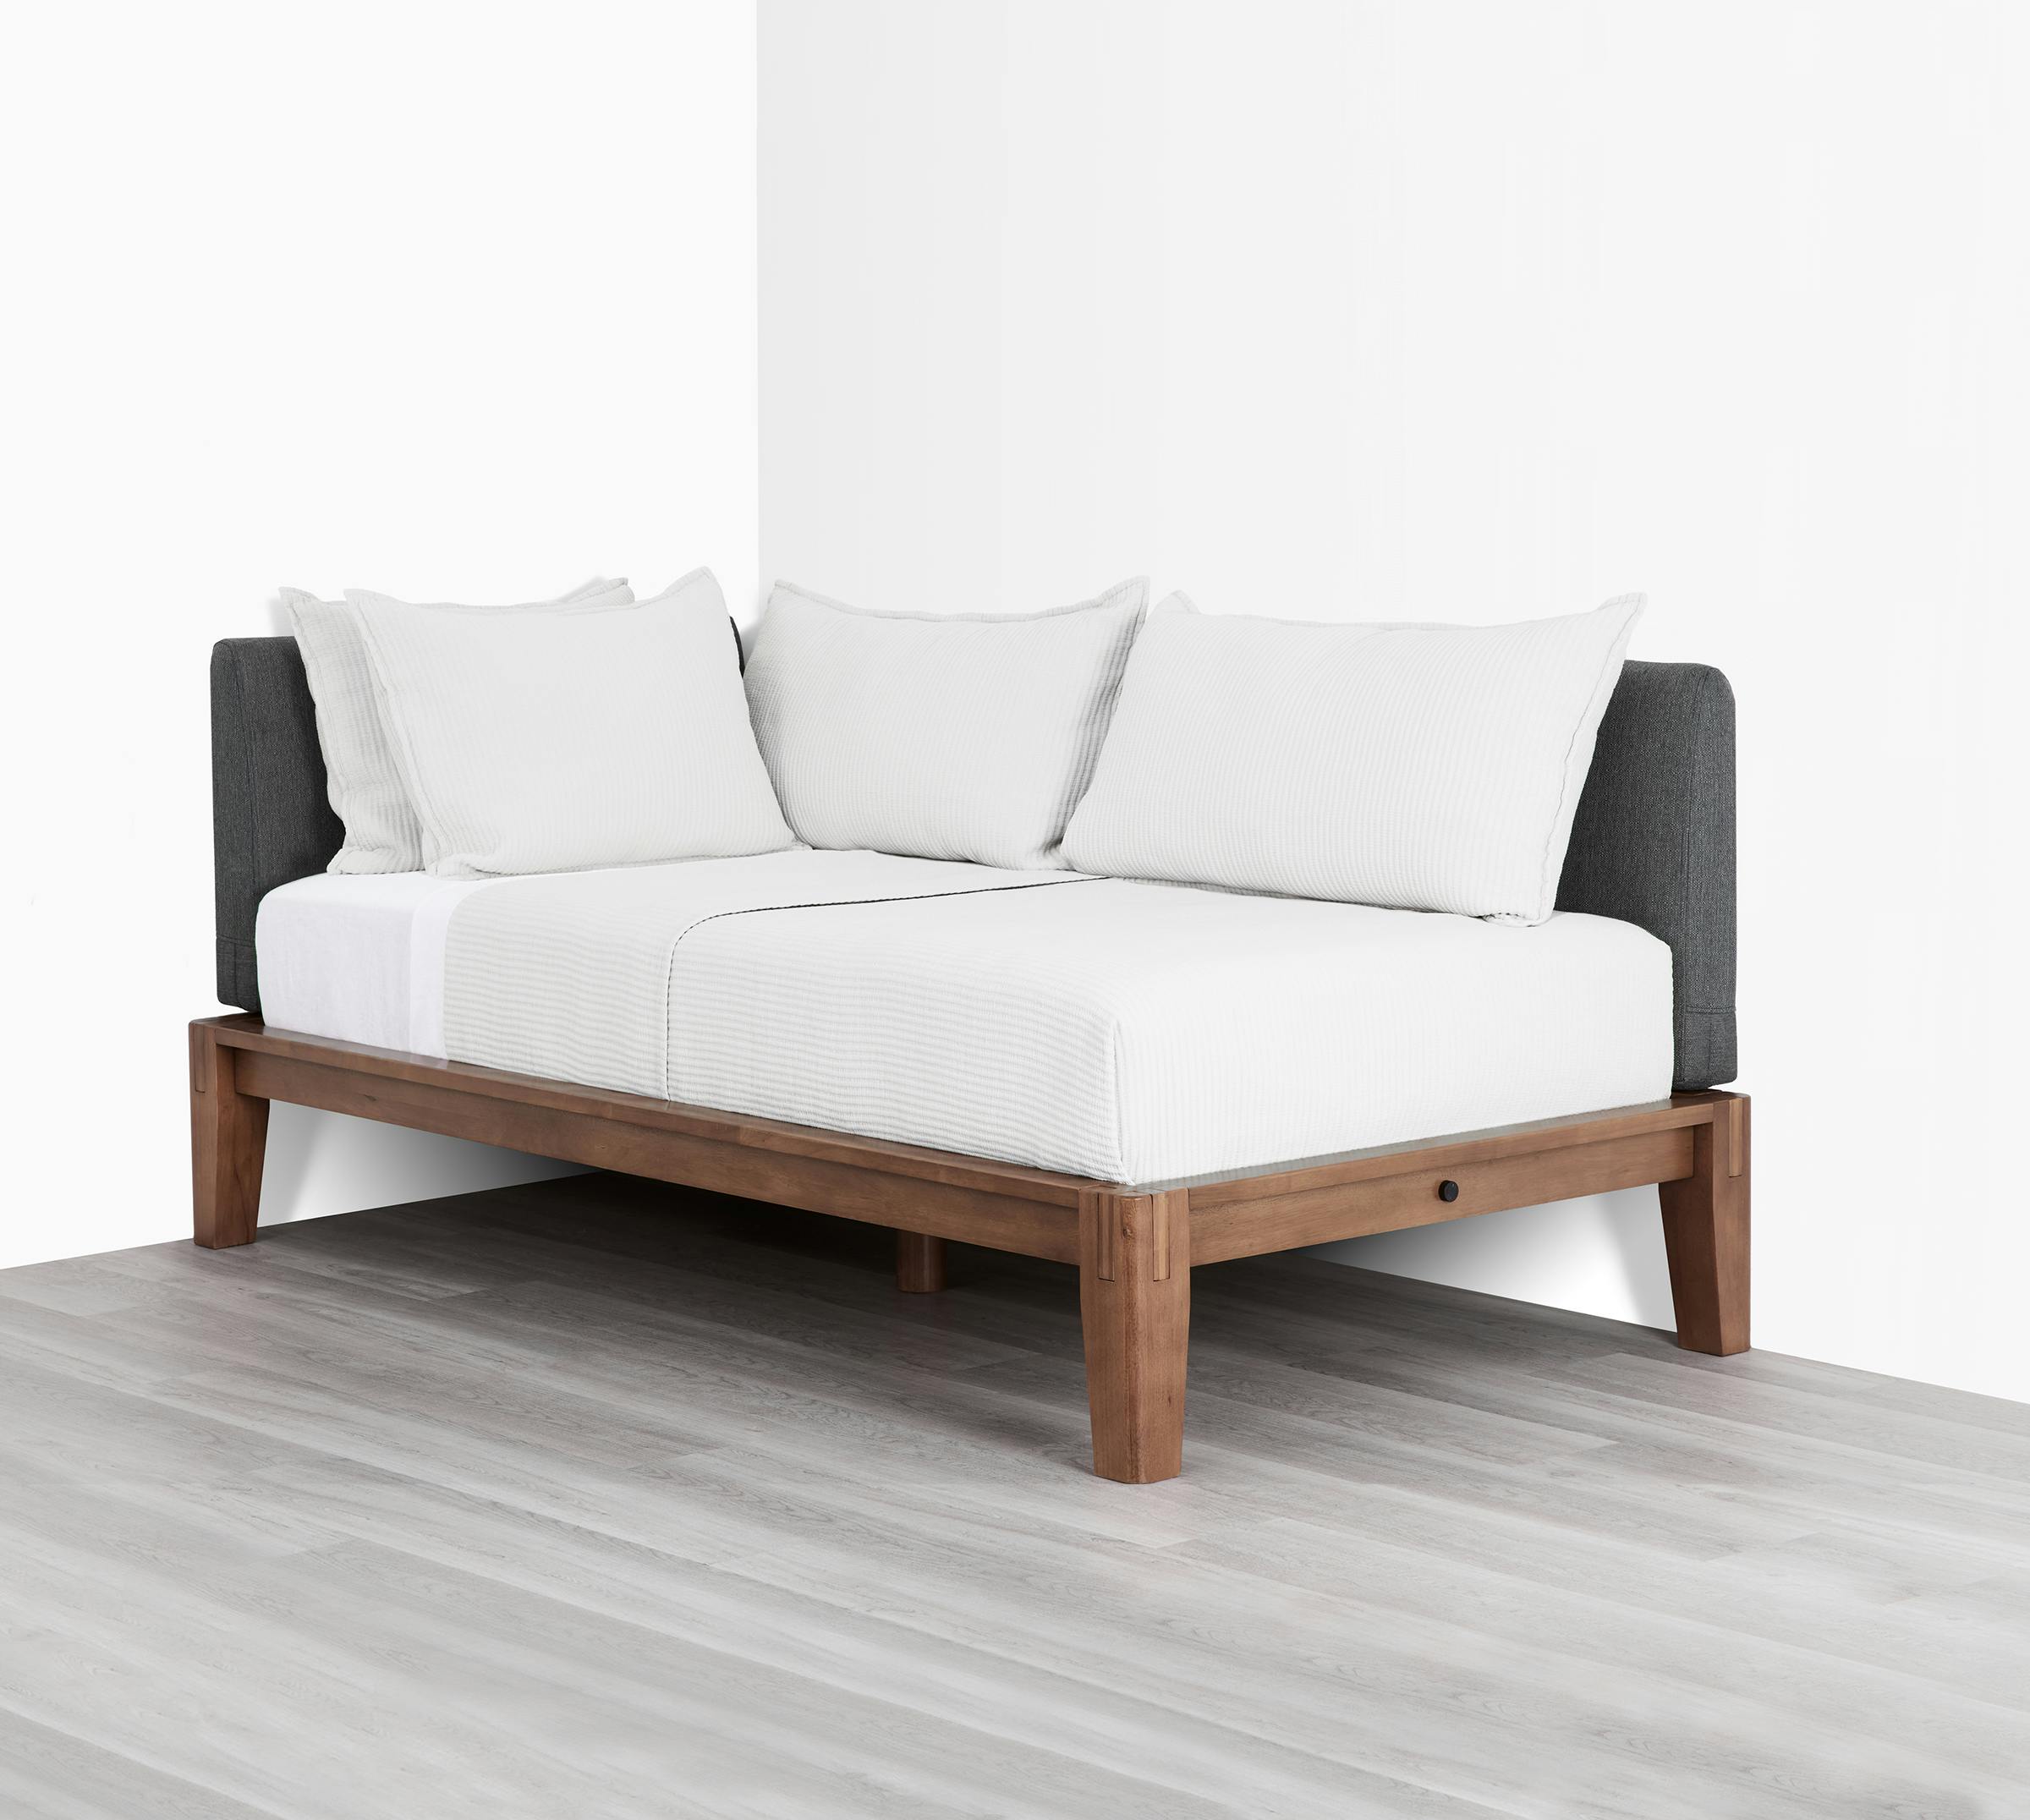 The Bed (Daybed / Walnut / Dark Charcoal) - Diagonal 2